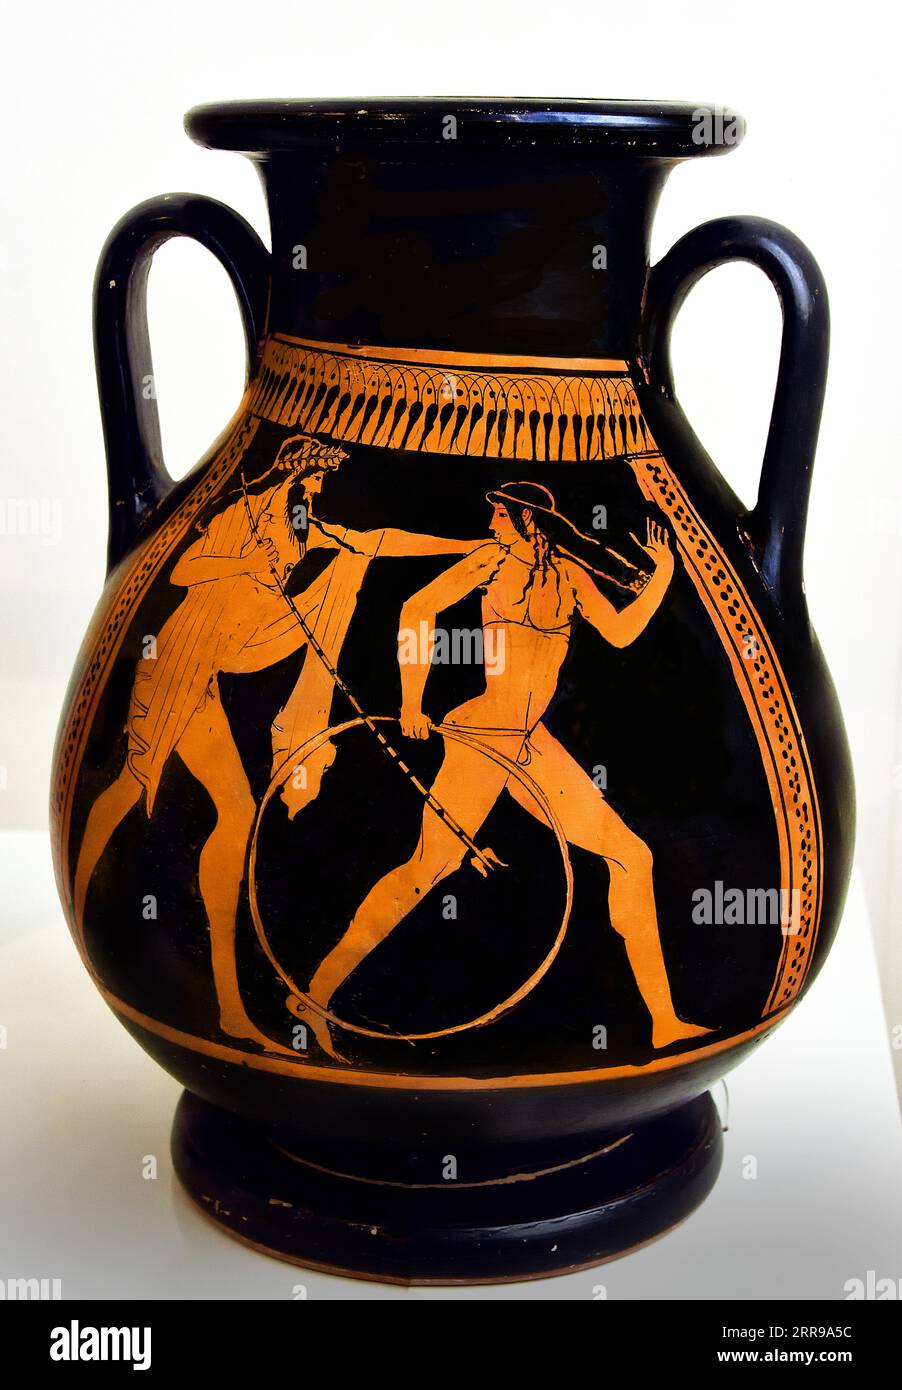 Pelike A, Zeus and Ganymede. B Zeus and Hera from Modi Locris 470-460 BC Athens, Museum, Greek, Greece. Museum of Cycladic Art Stock Photo